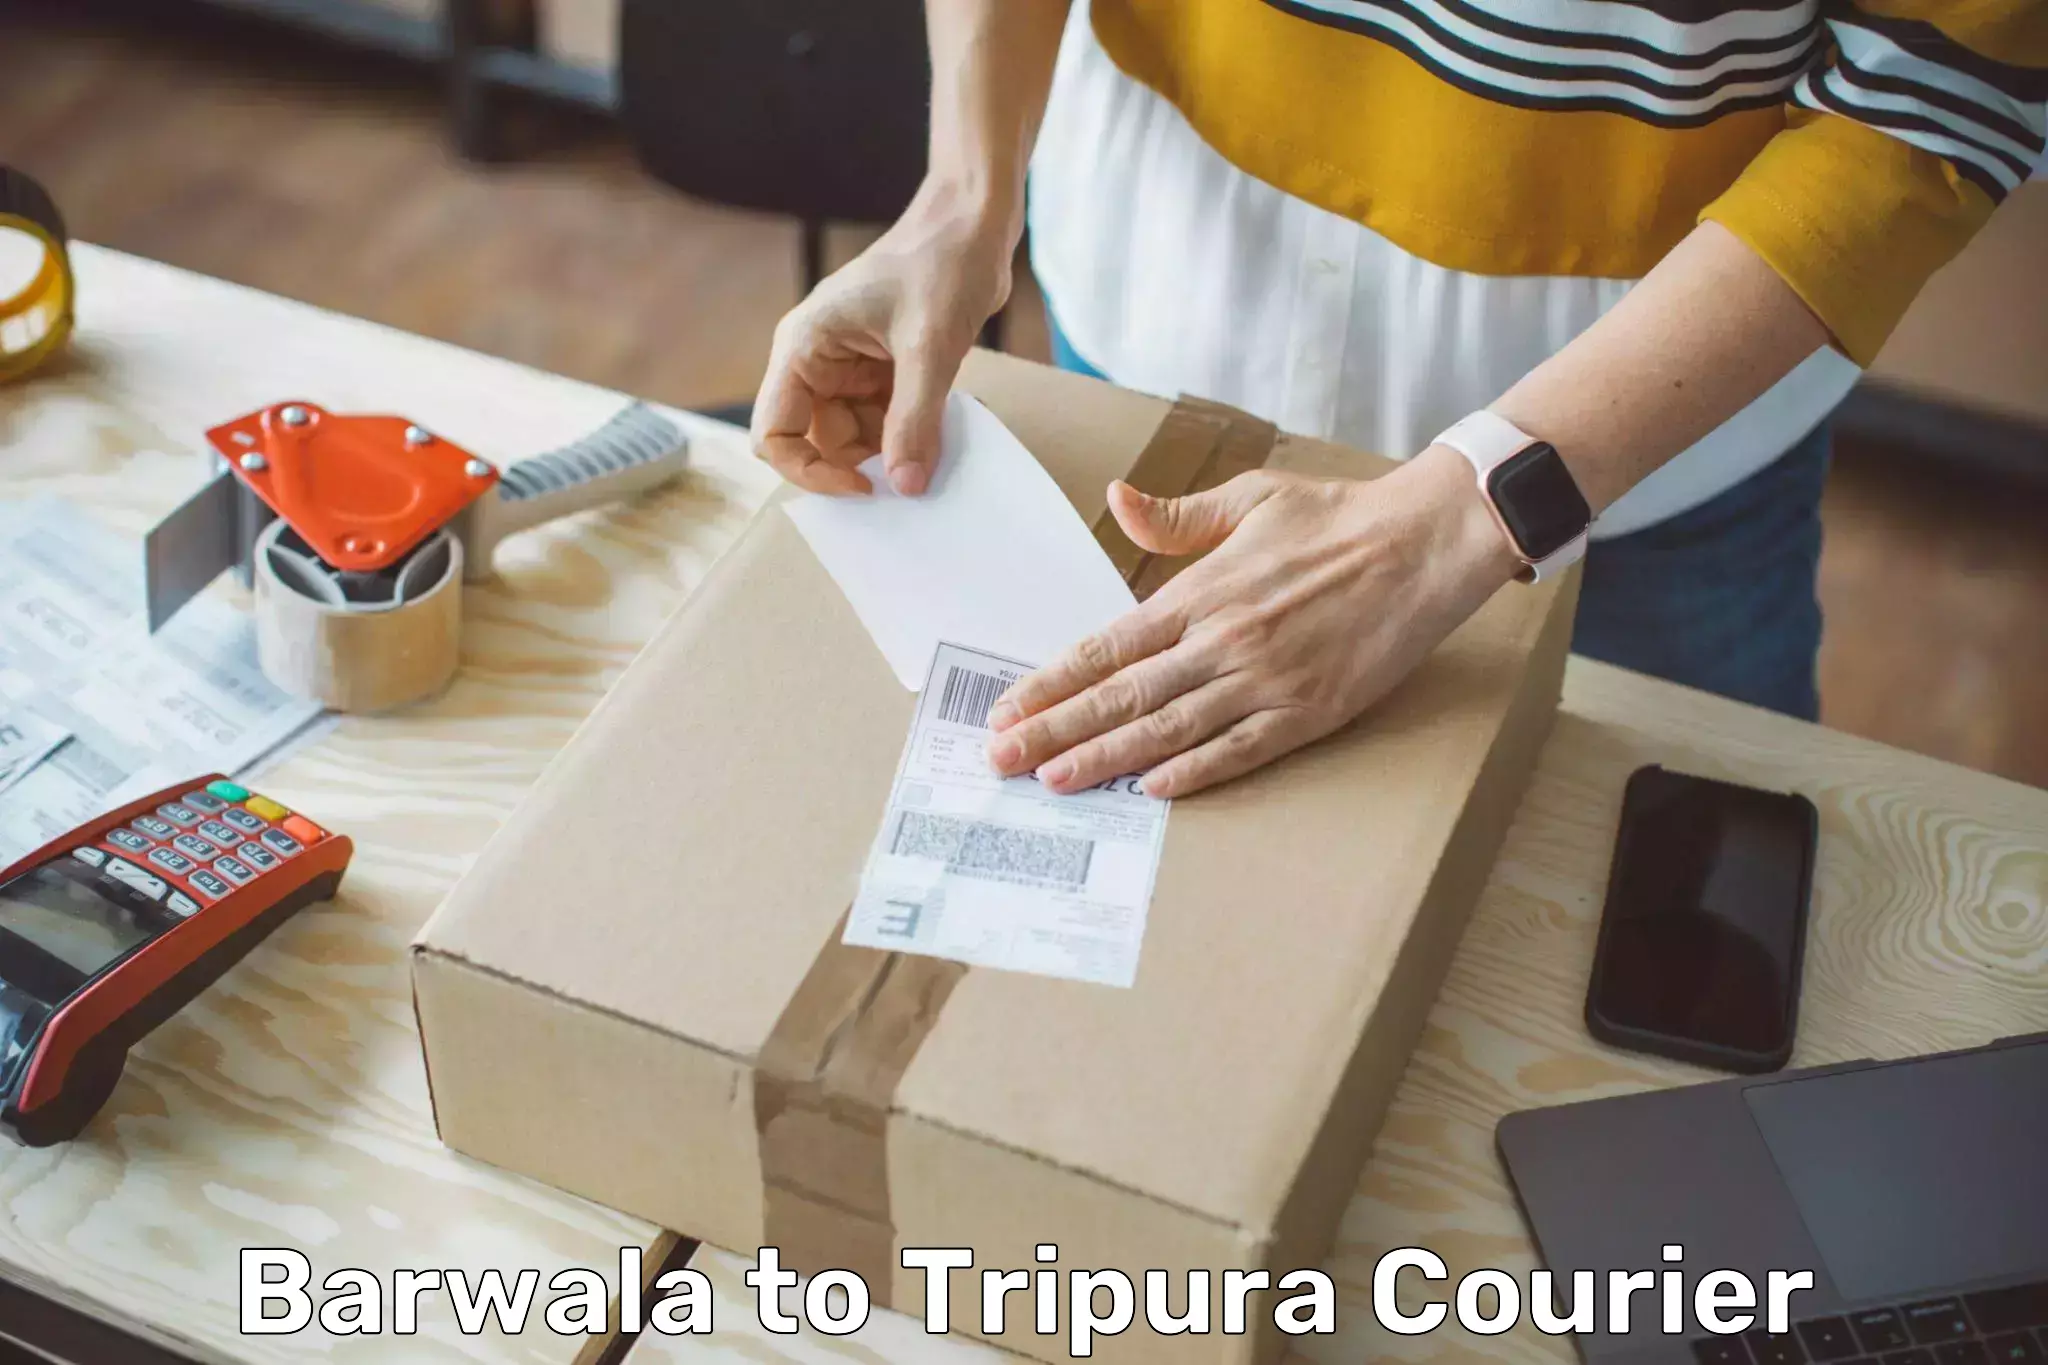 Reliable courier service Barwala to Dharmanagar